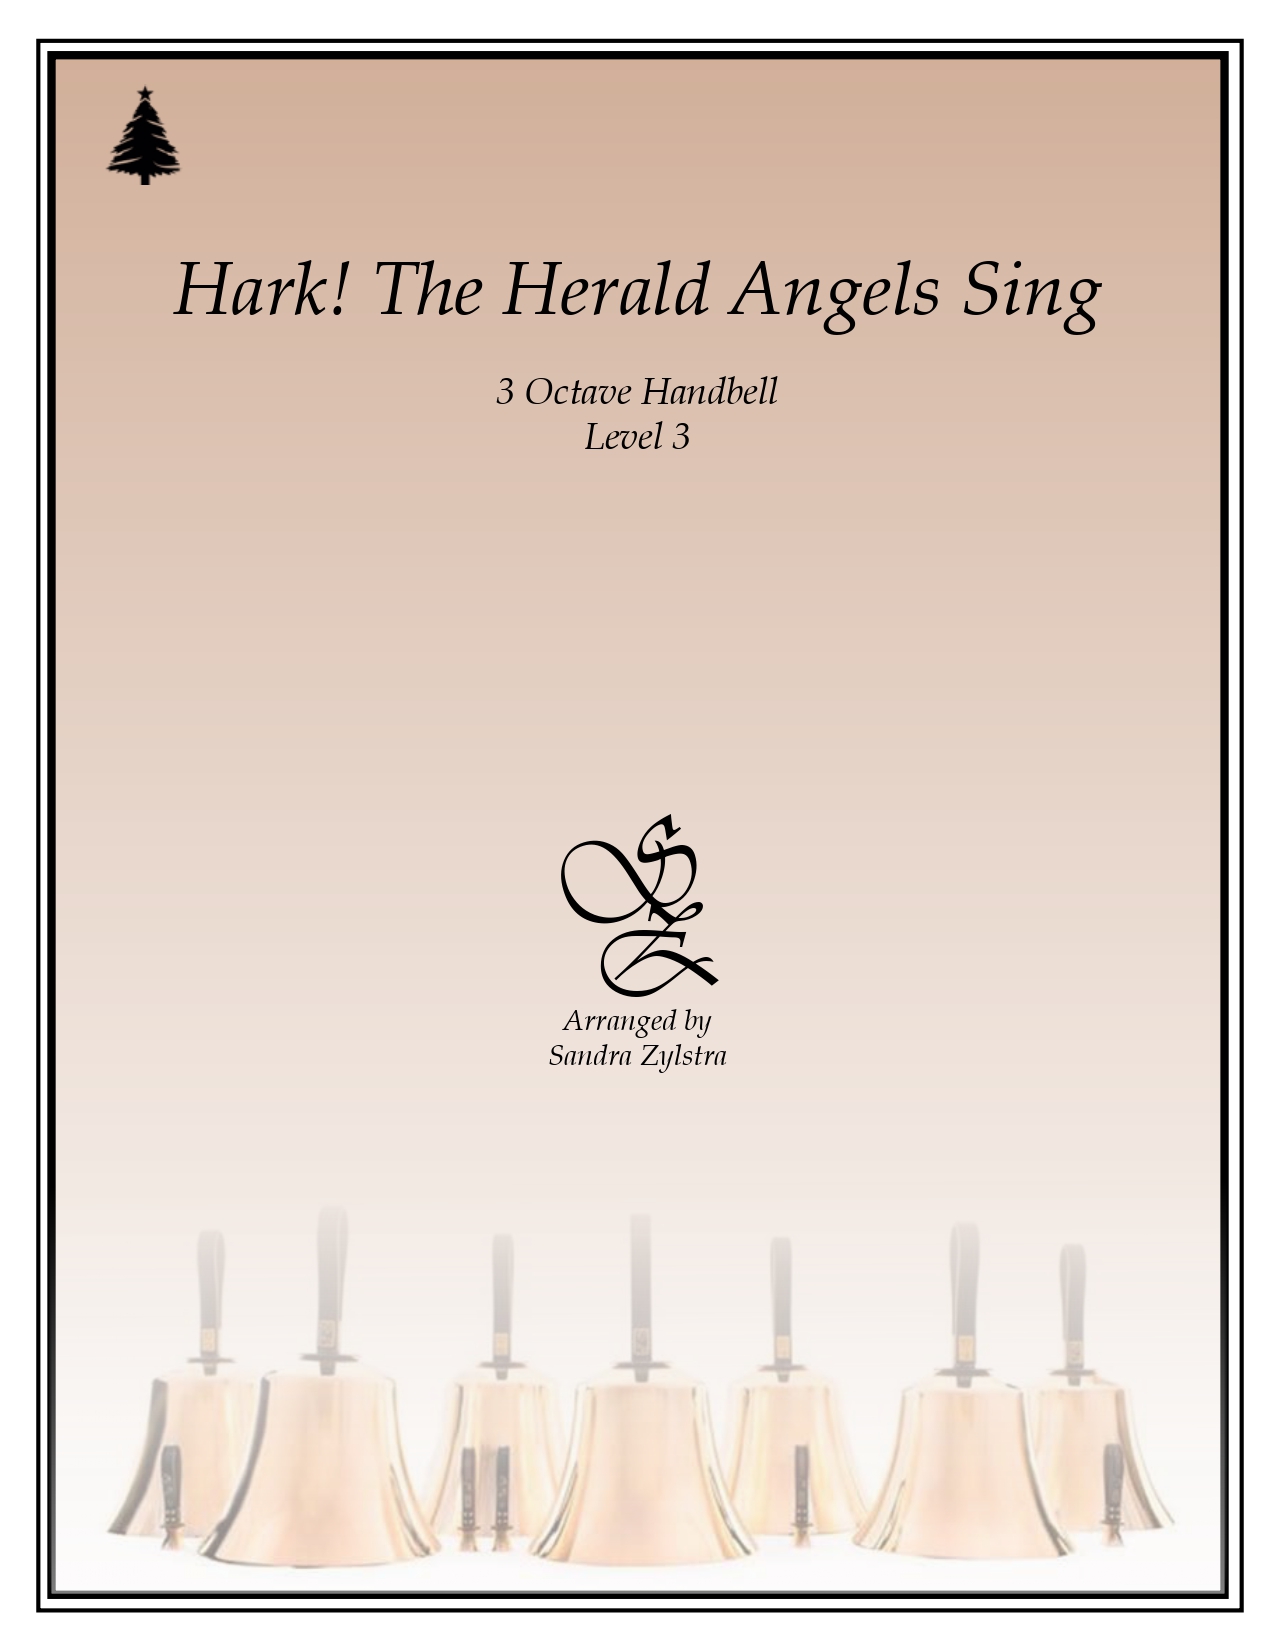 Hark The Herald Angels Sing 3 octave handbells cover page 00011